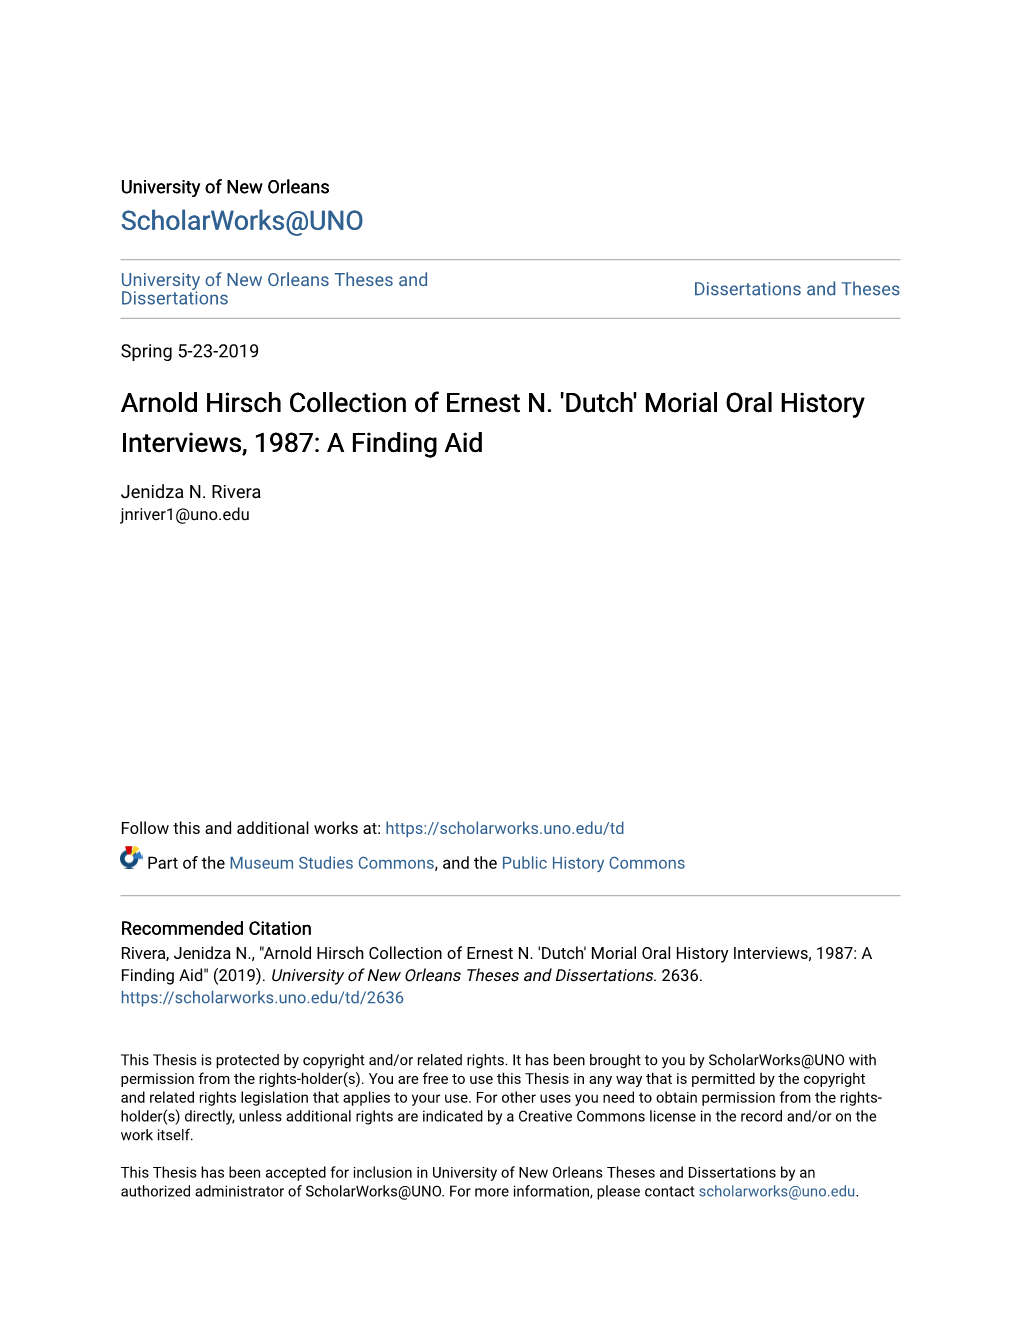 Arnold Hirsch Collection of Ernest N. 'Dutch' Morial Oral History Interviews, 1987: a Finding Aid